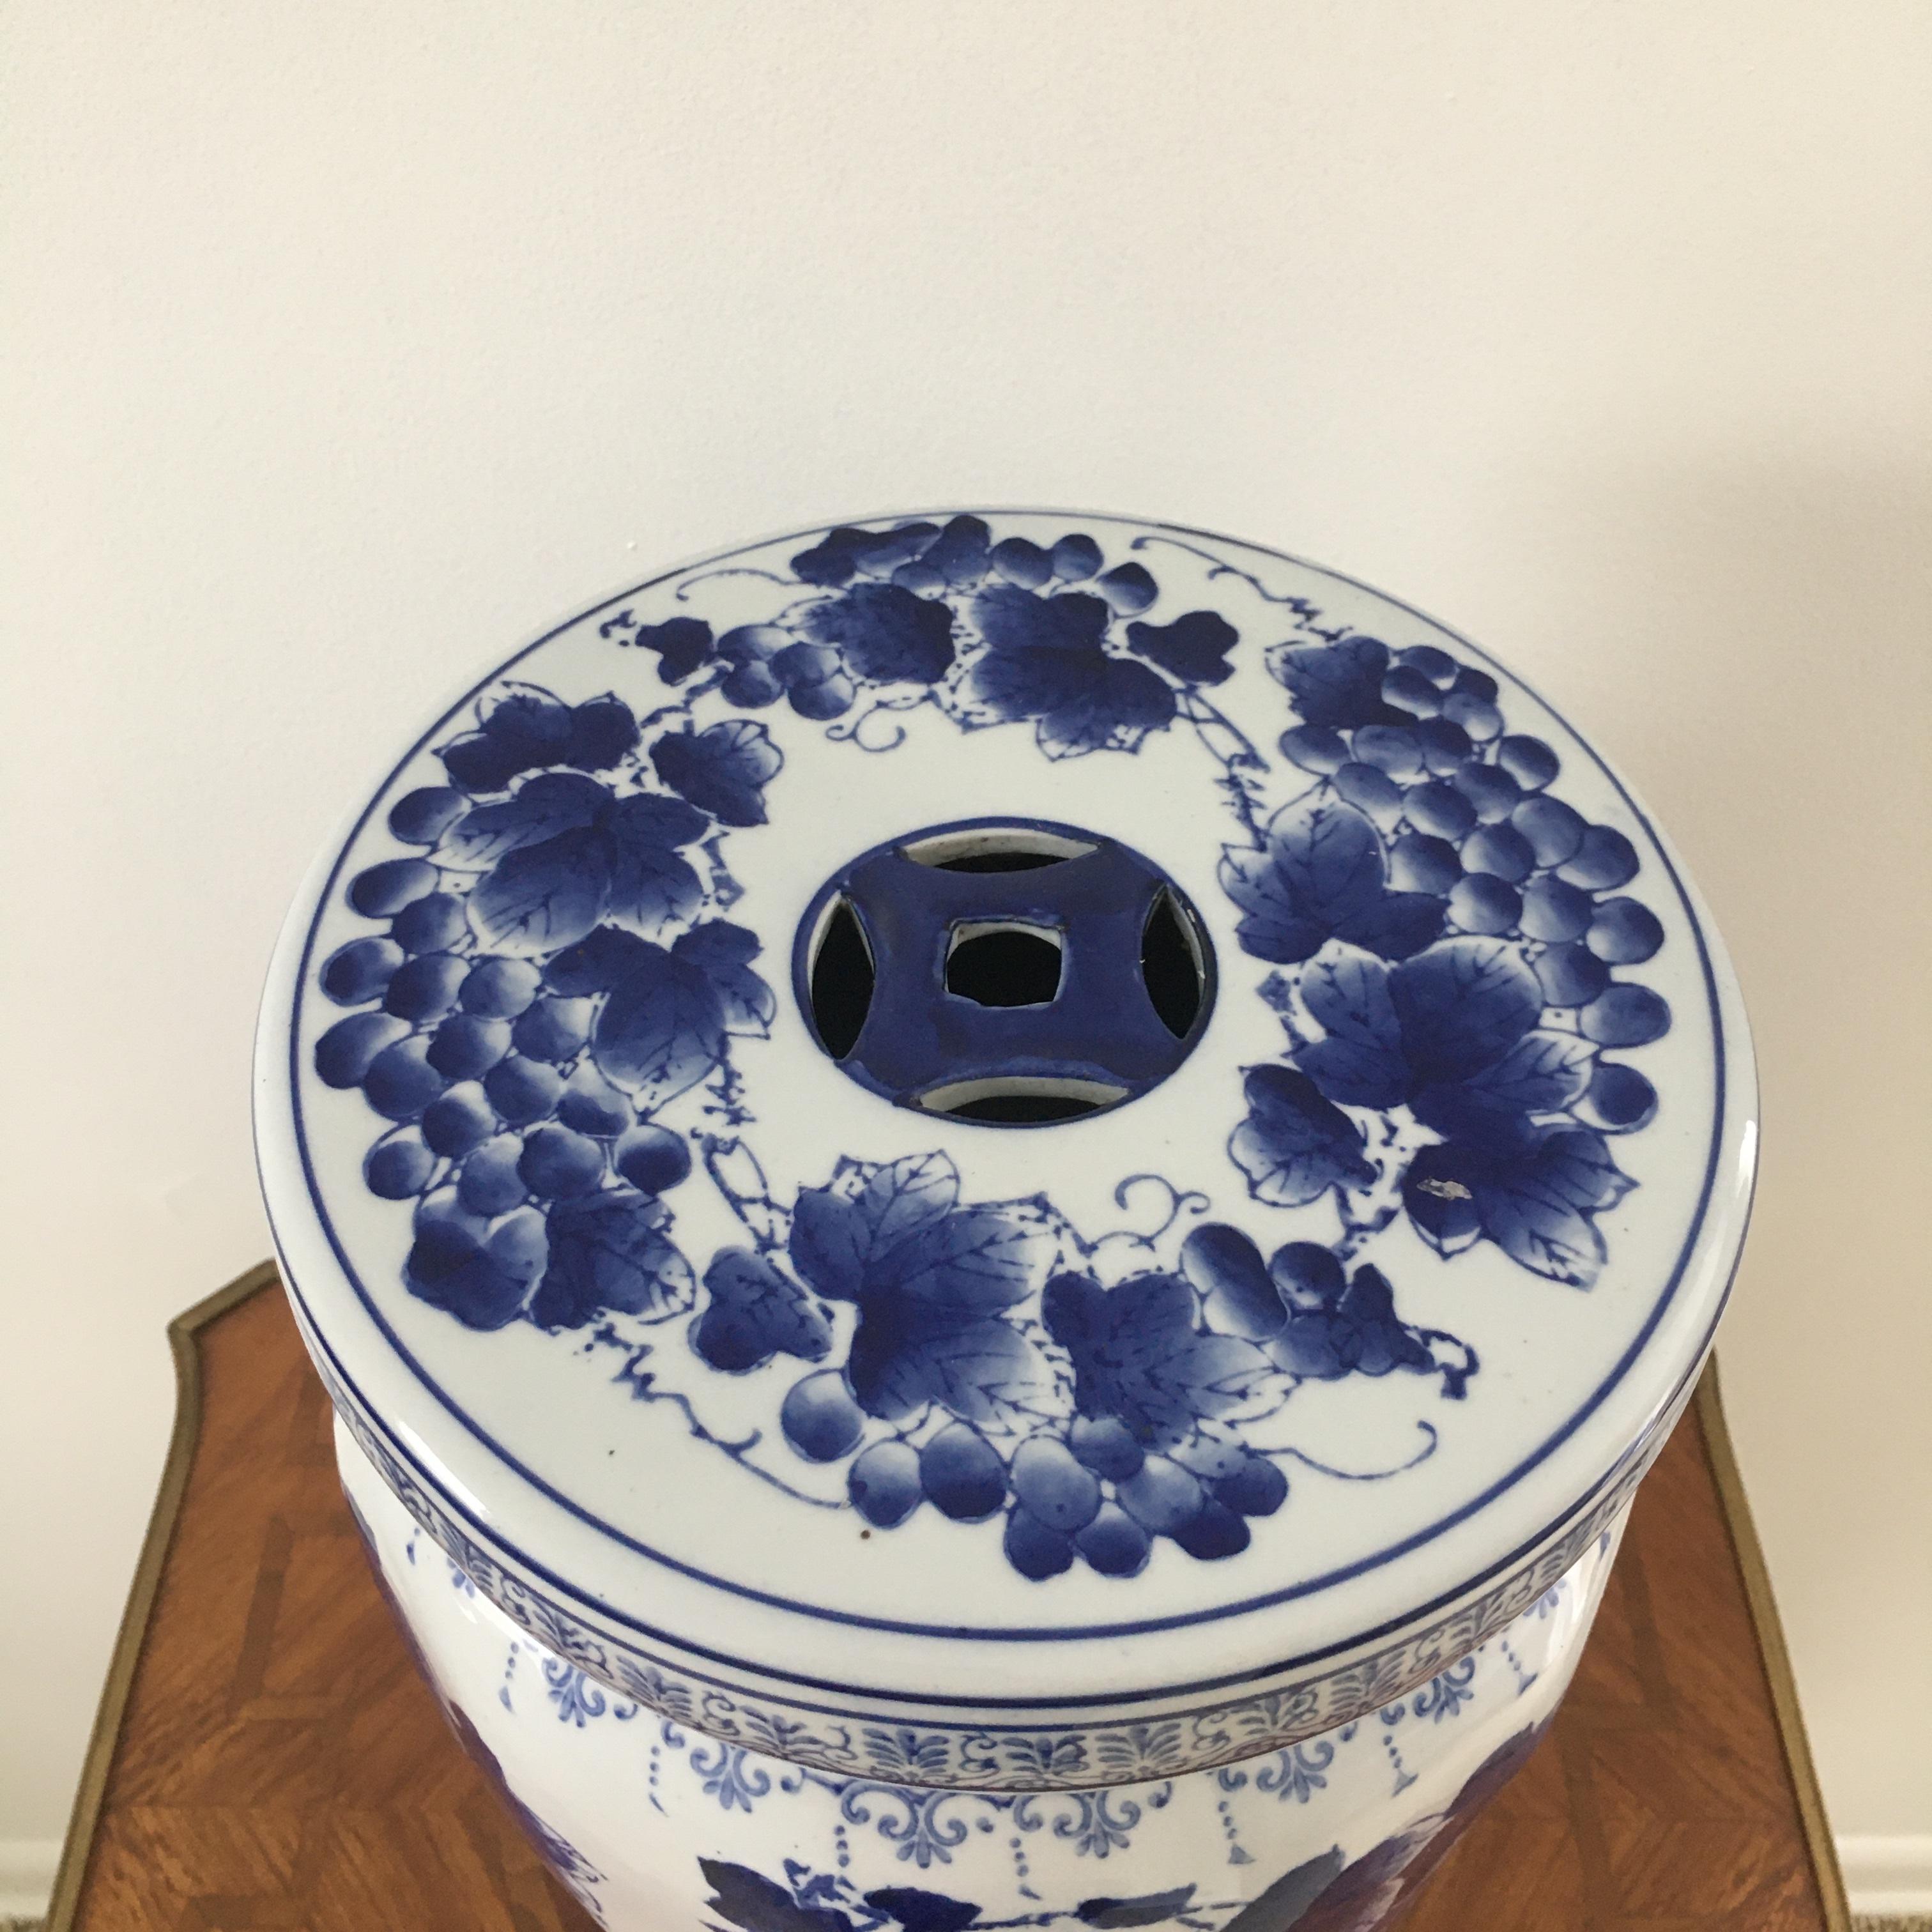 A lovely Chinese blue and white porcelain garden stool with grape motif.

Measures: 10.5